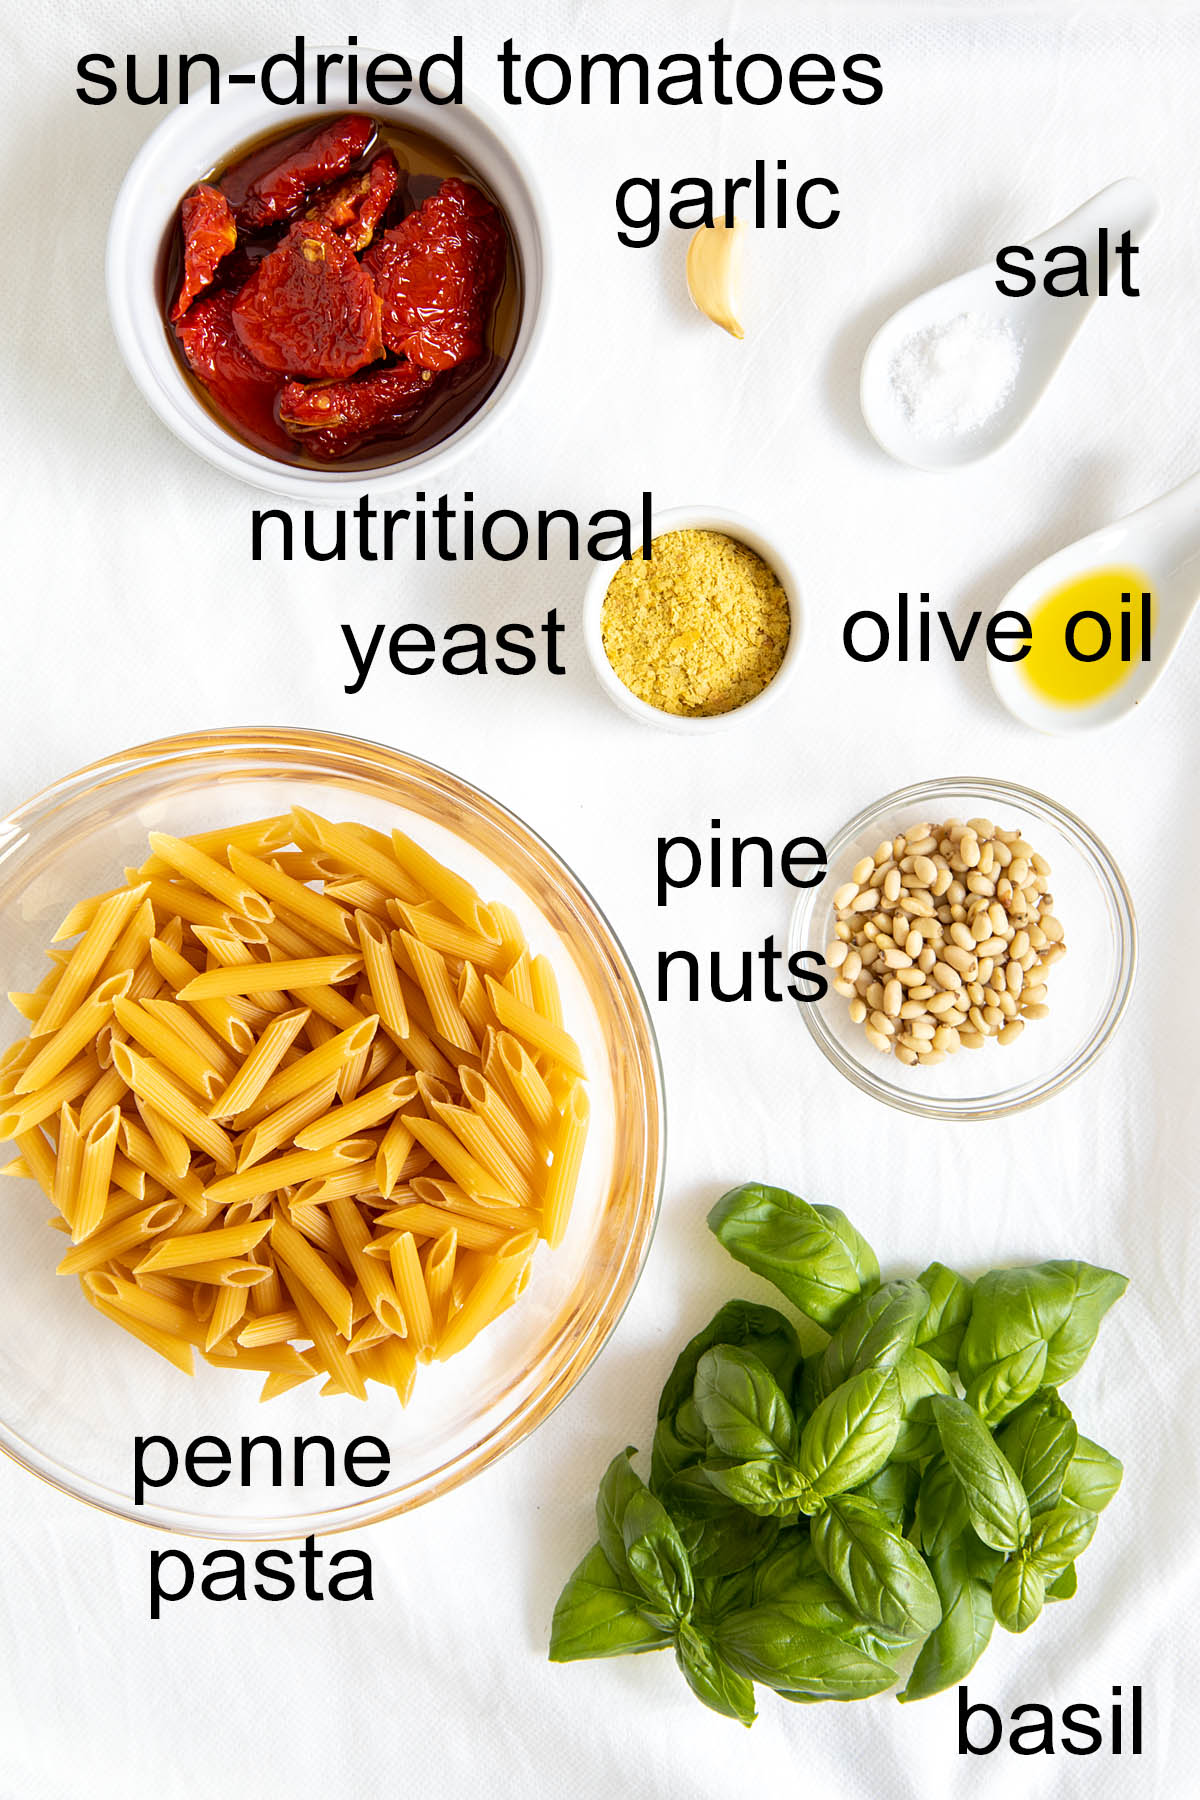 Sun-dried tomatoes, garlic, salt, nutritional yeast, olive oil, pine nuts, penne pasta, and basil with labels.